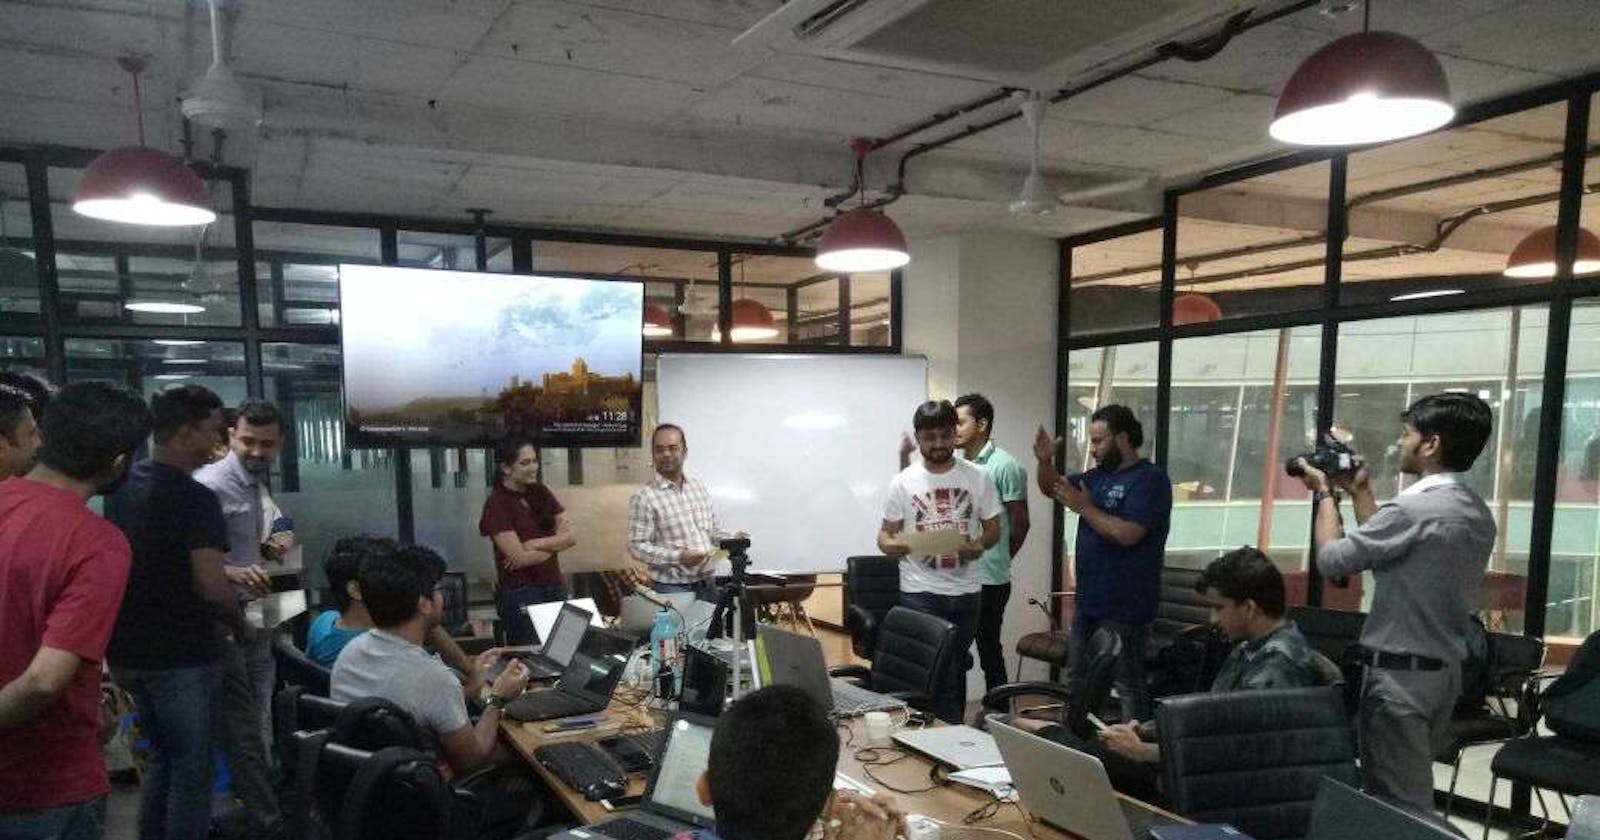 The story of my first hackathon | 1 hackathon: 48 hours: Immeasurable learnings